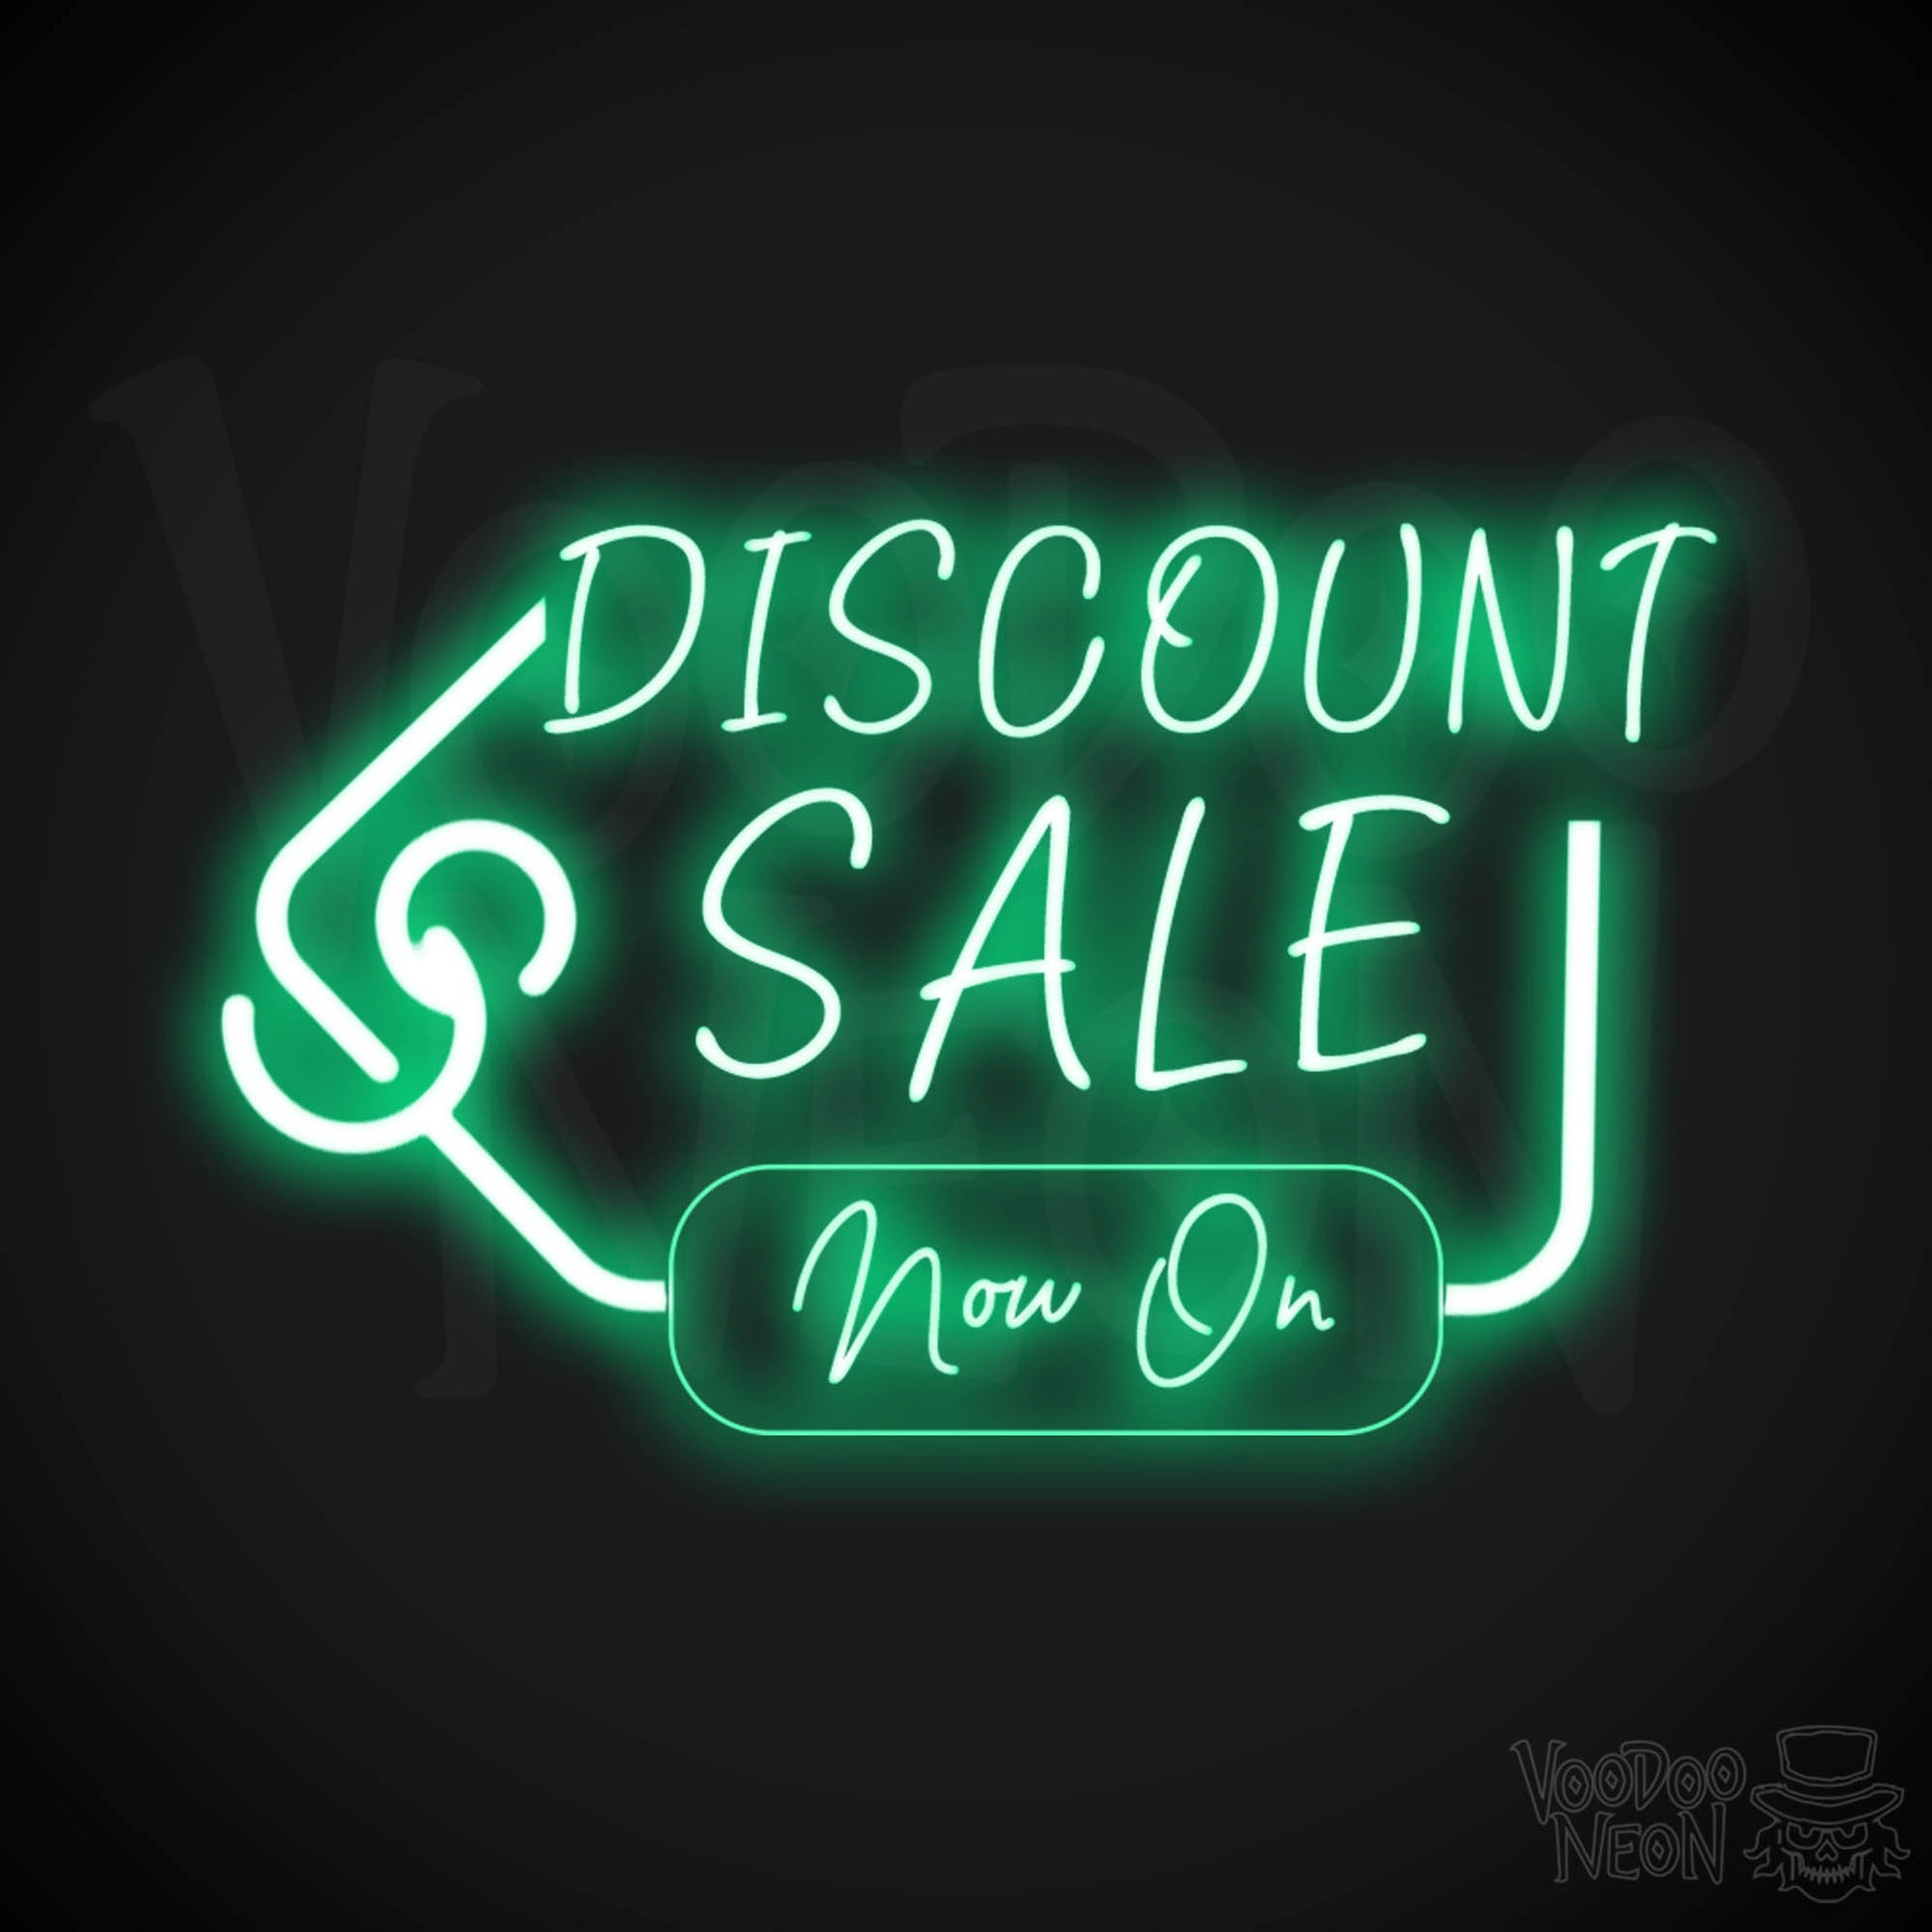 Discount Sale Now On Neon Sign - LED Wall Art - Color Green